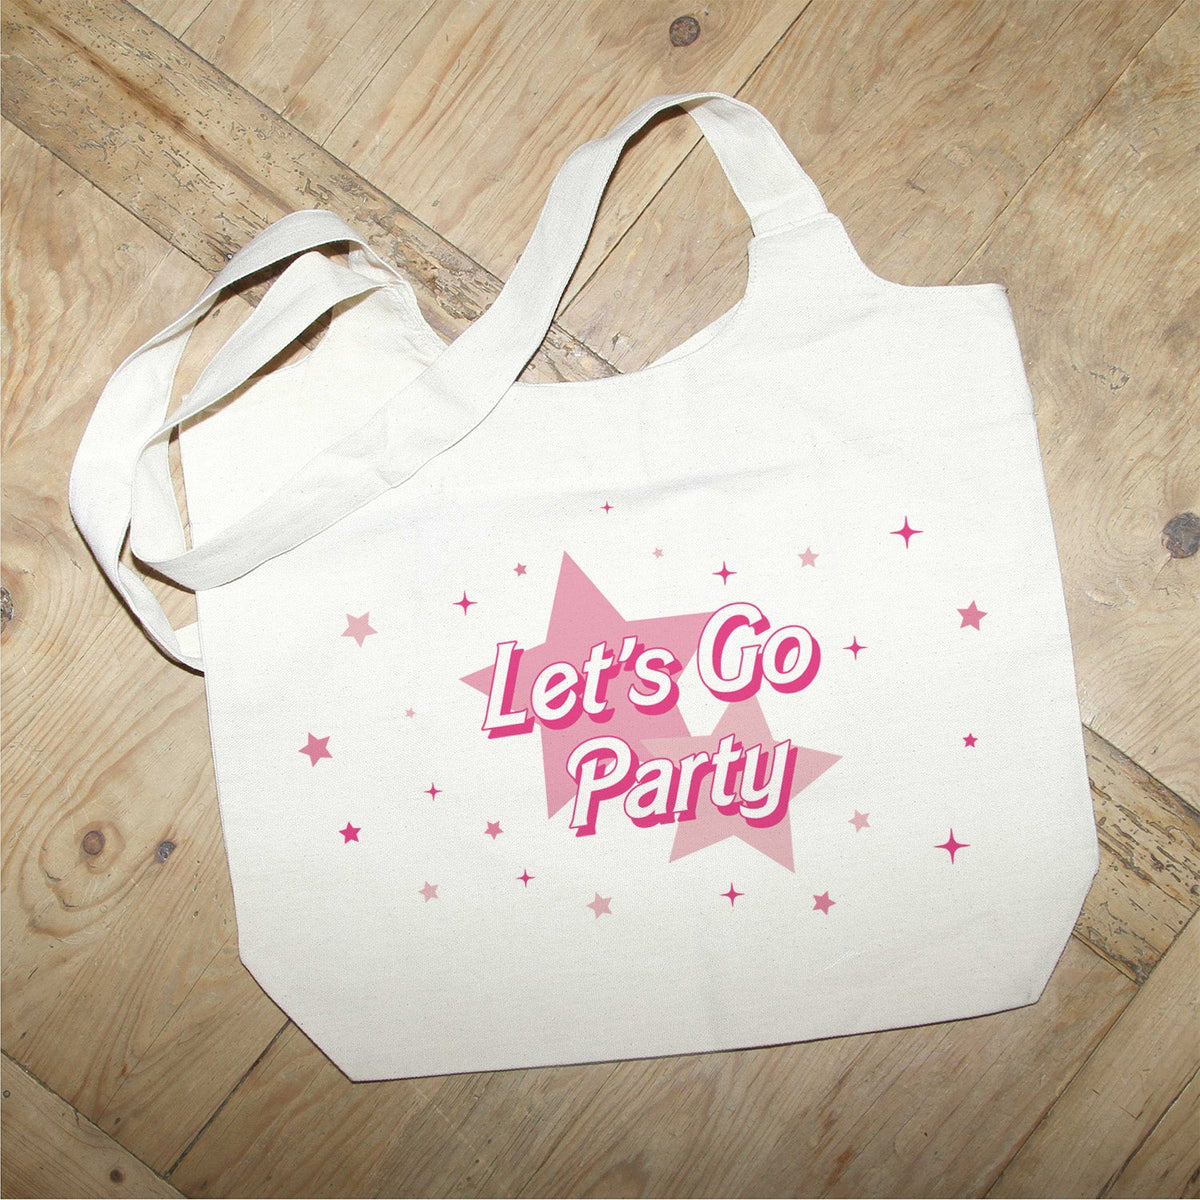 Lets Go Party / Trend Natural Tote Bag